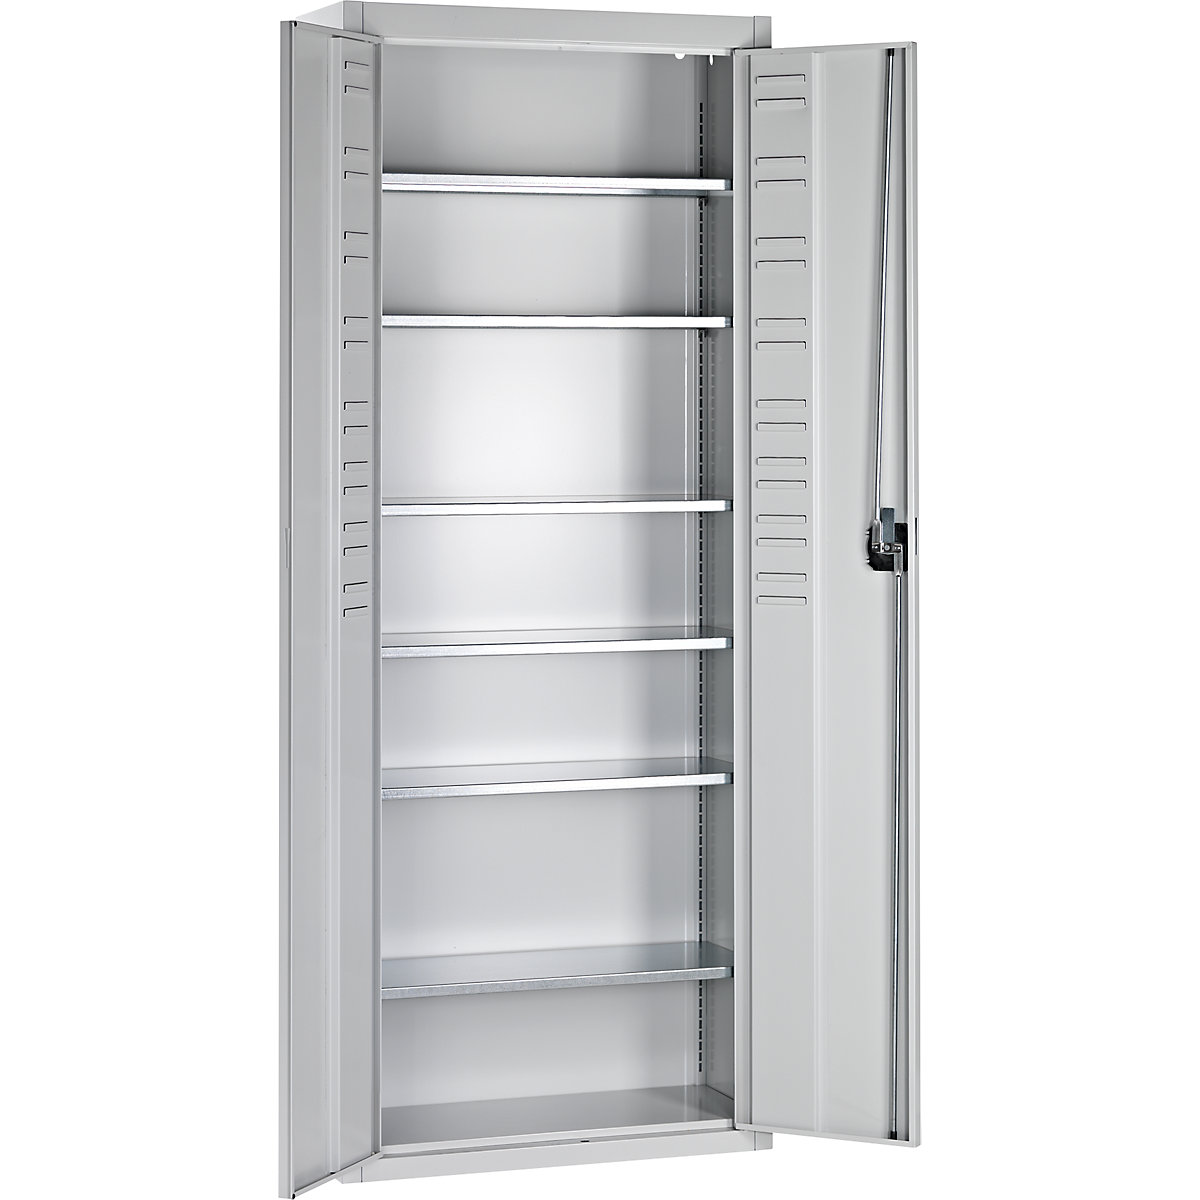 Storage cupboard, without open fronted storage bins – mauser, HxWxD 1740 x 680 x 280 mm, single colour, light grey-4